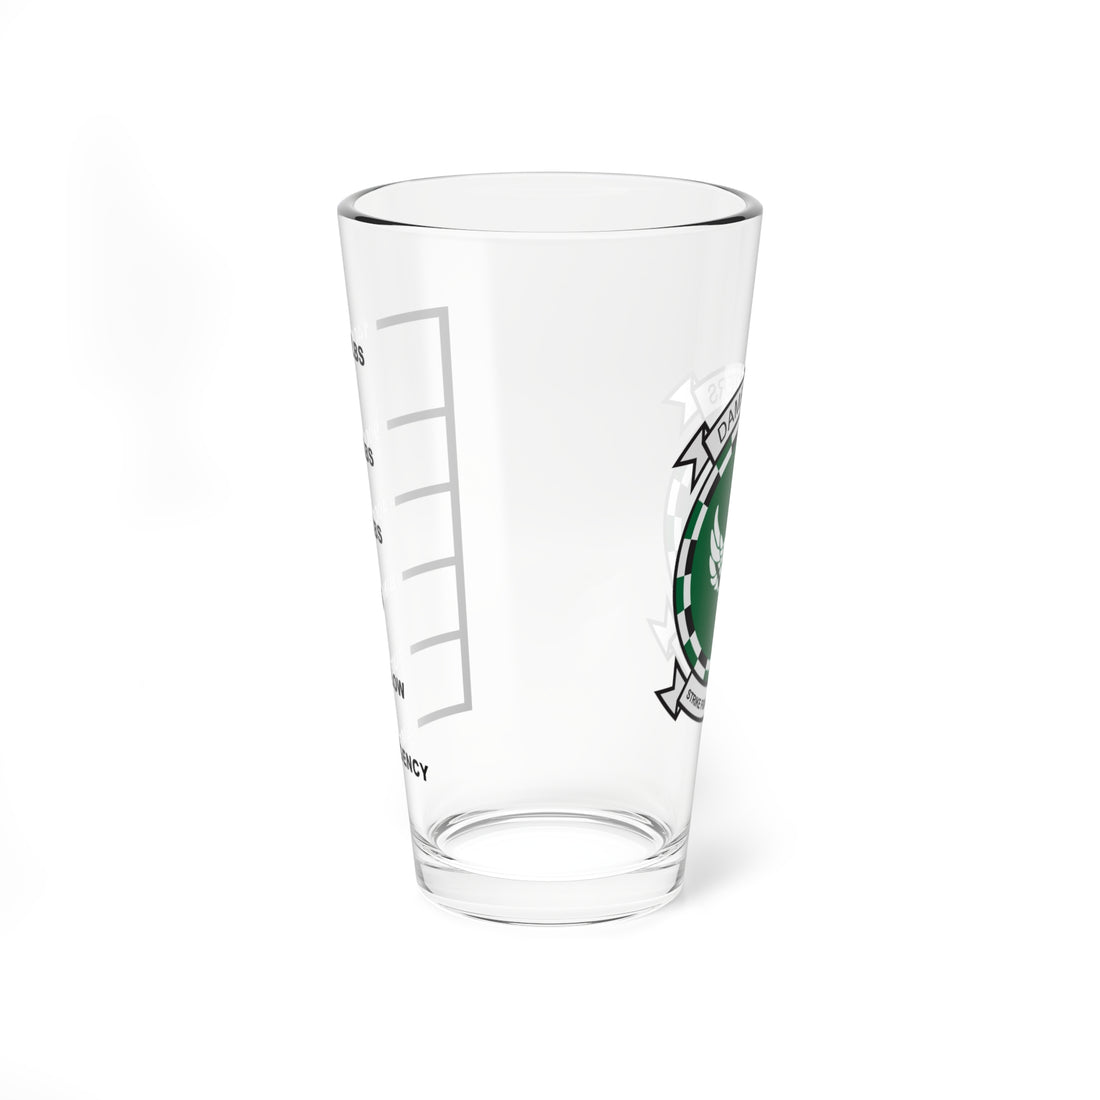 VFA-195 "Dambusters" Fuel Low Pint Glass, Navy Strike Fighter Squadron flying the F/A-18 Hornet